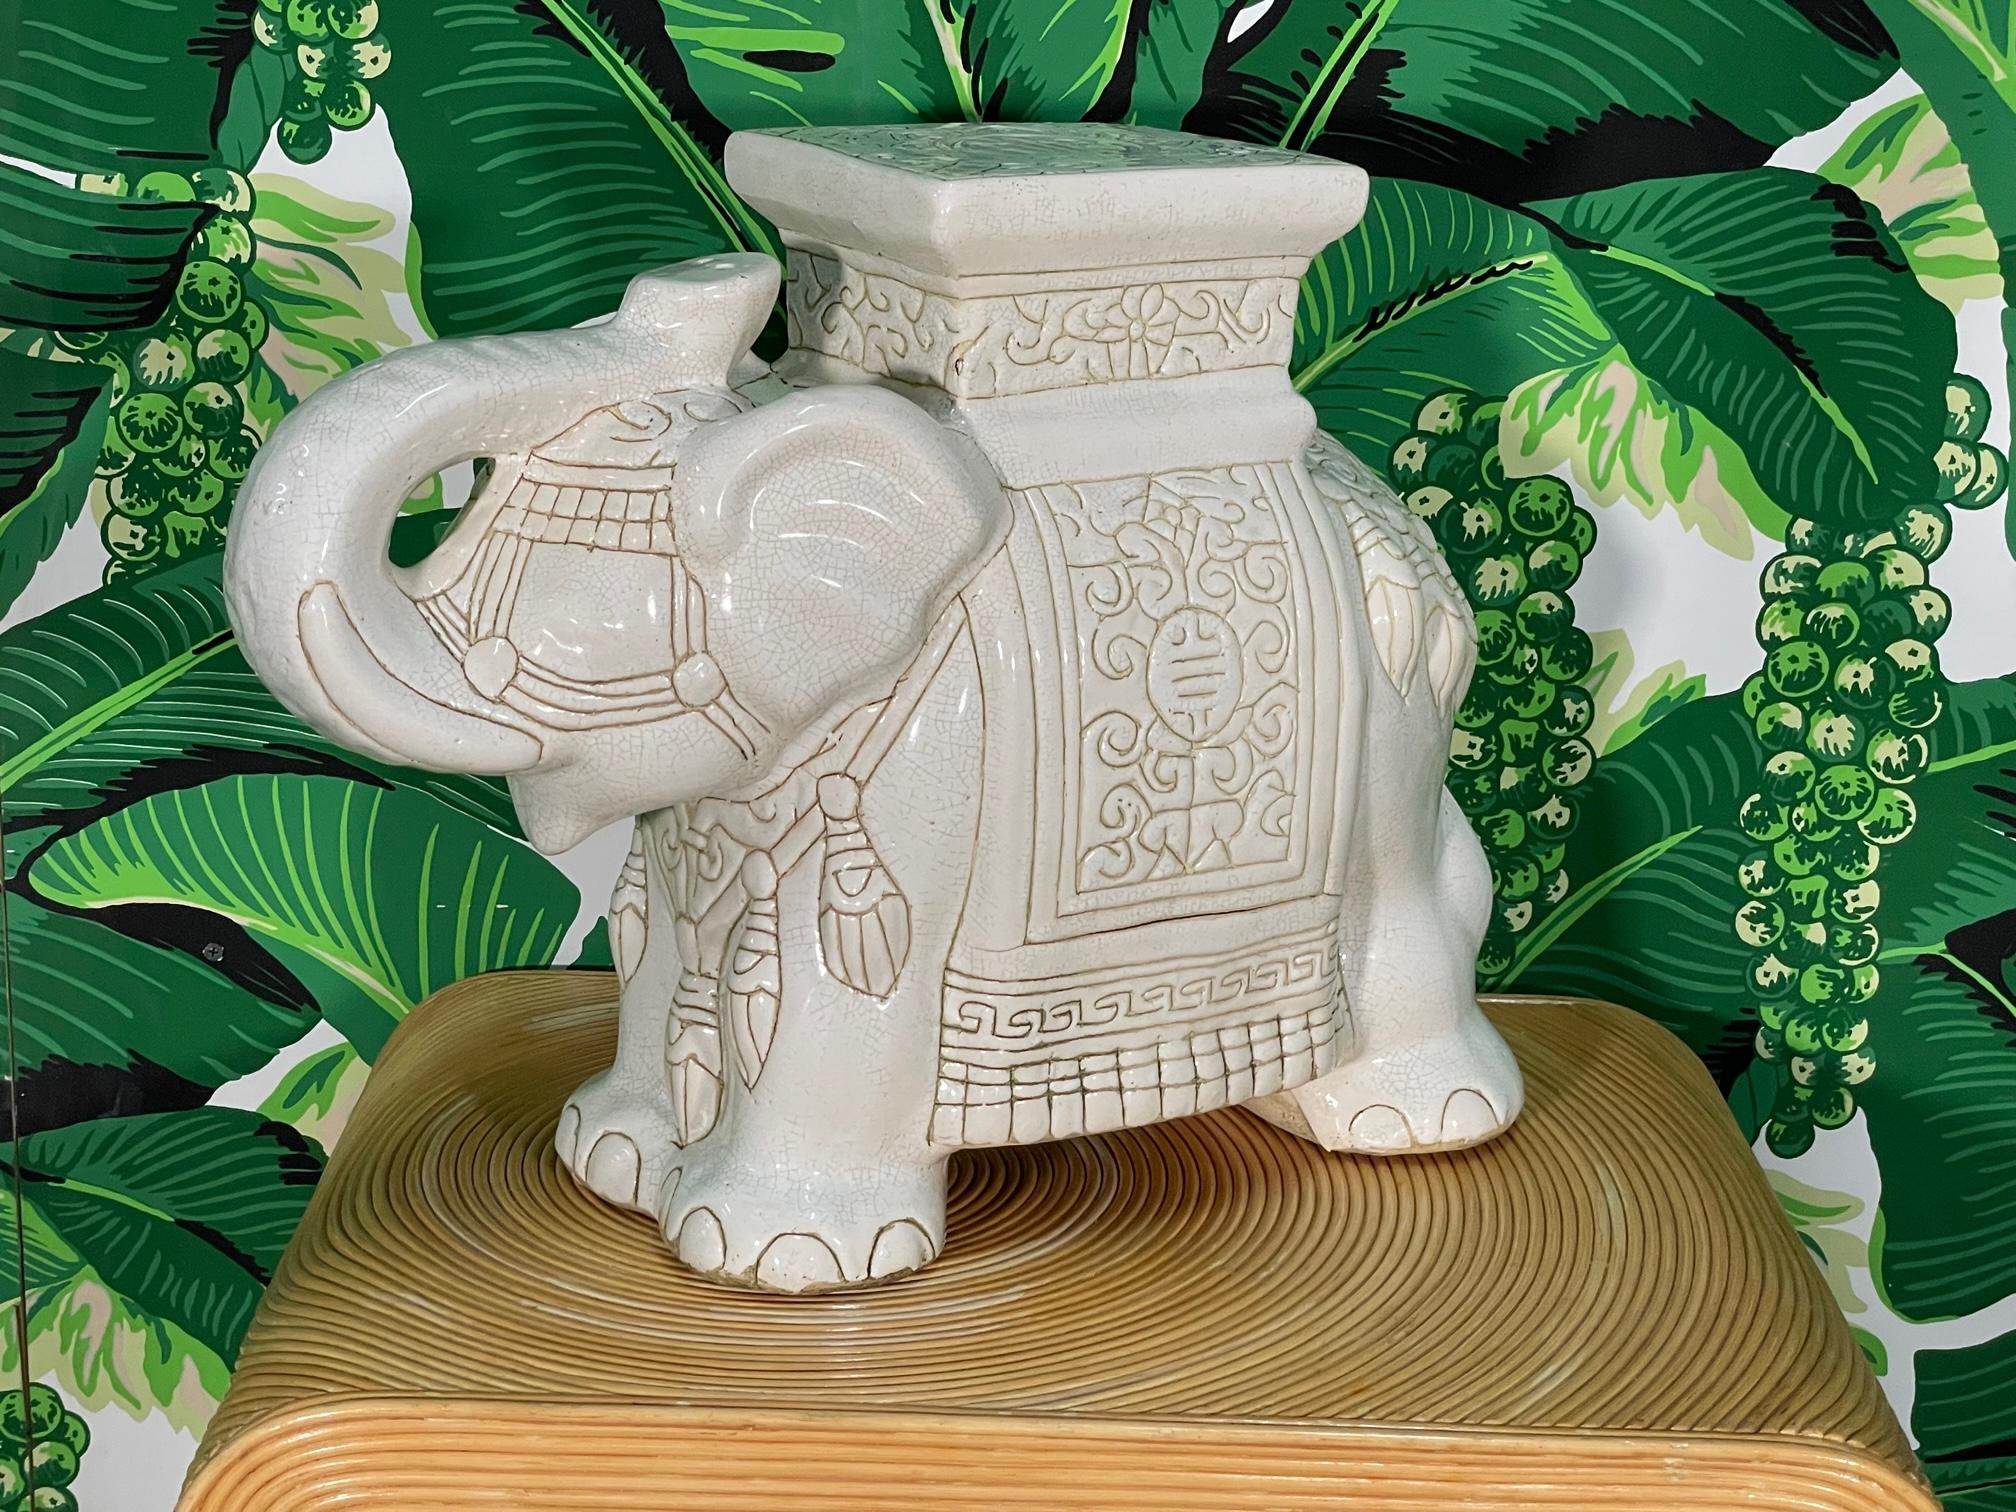 Ceramic elephant garden seat (or end table for cocktails) features a bright, glazed finish and a raised trunk signifying good luck. Good condition with imperfections consistent with age, see photos for condition details. 
For a shipping quote to